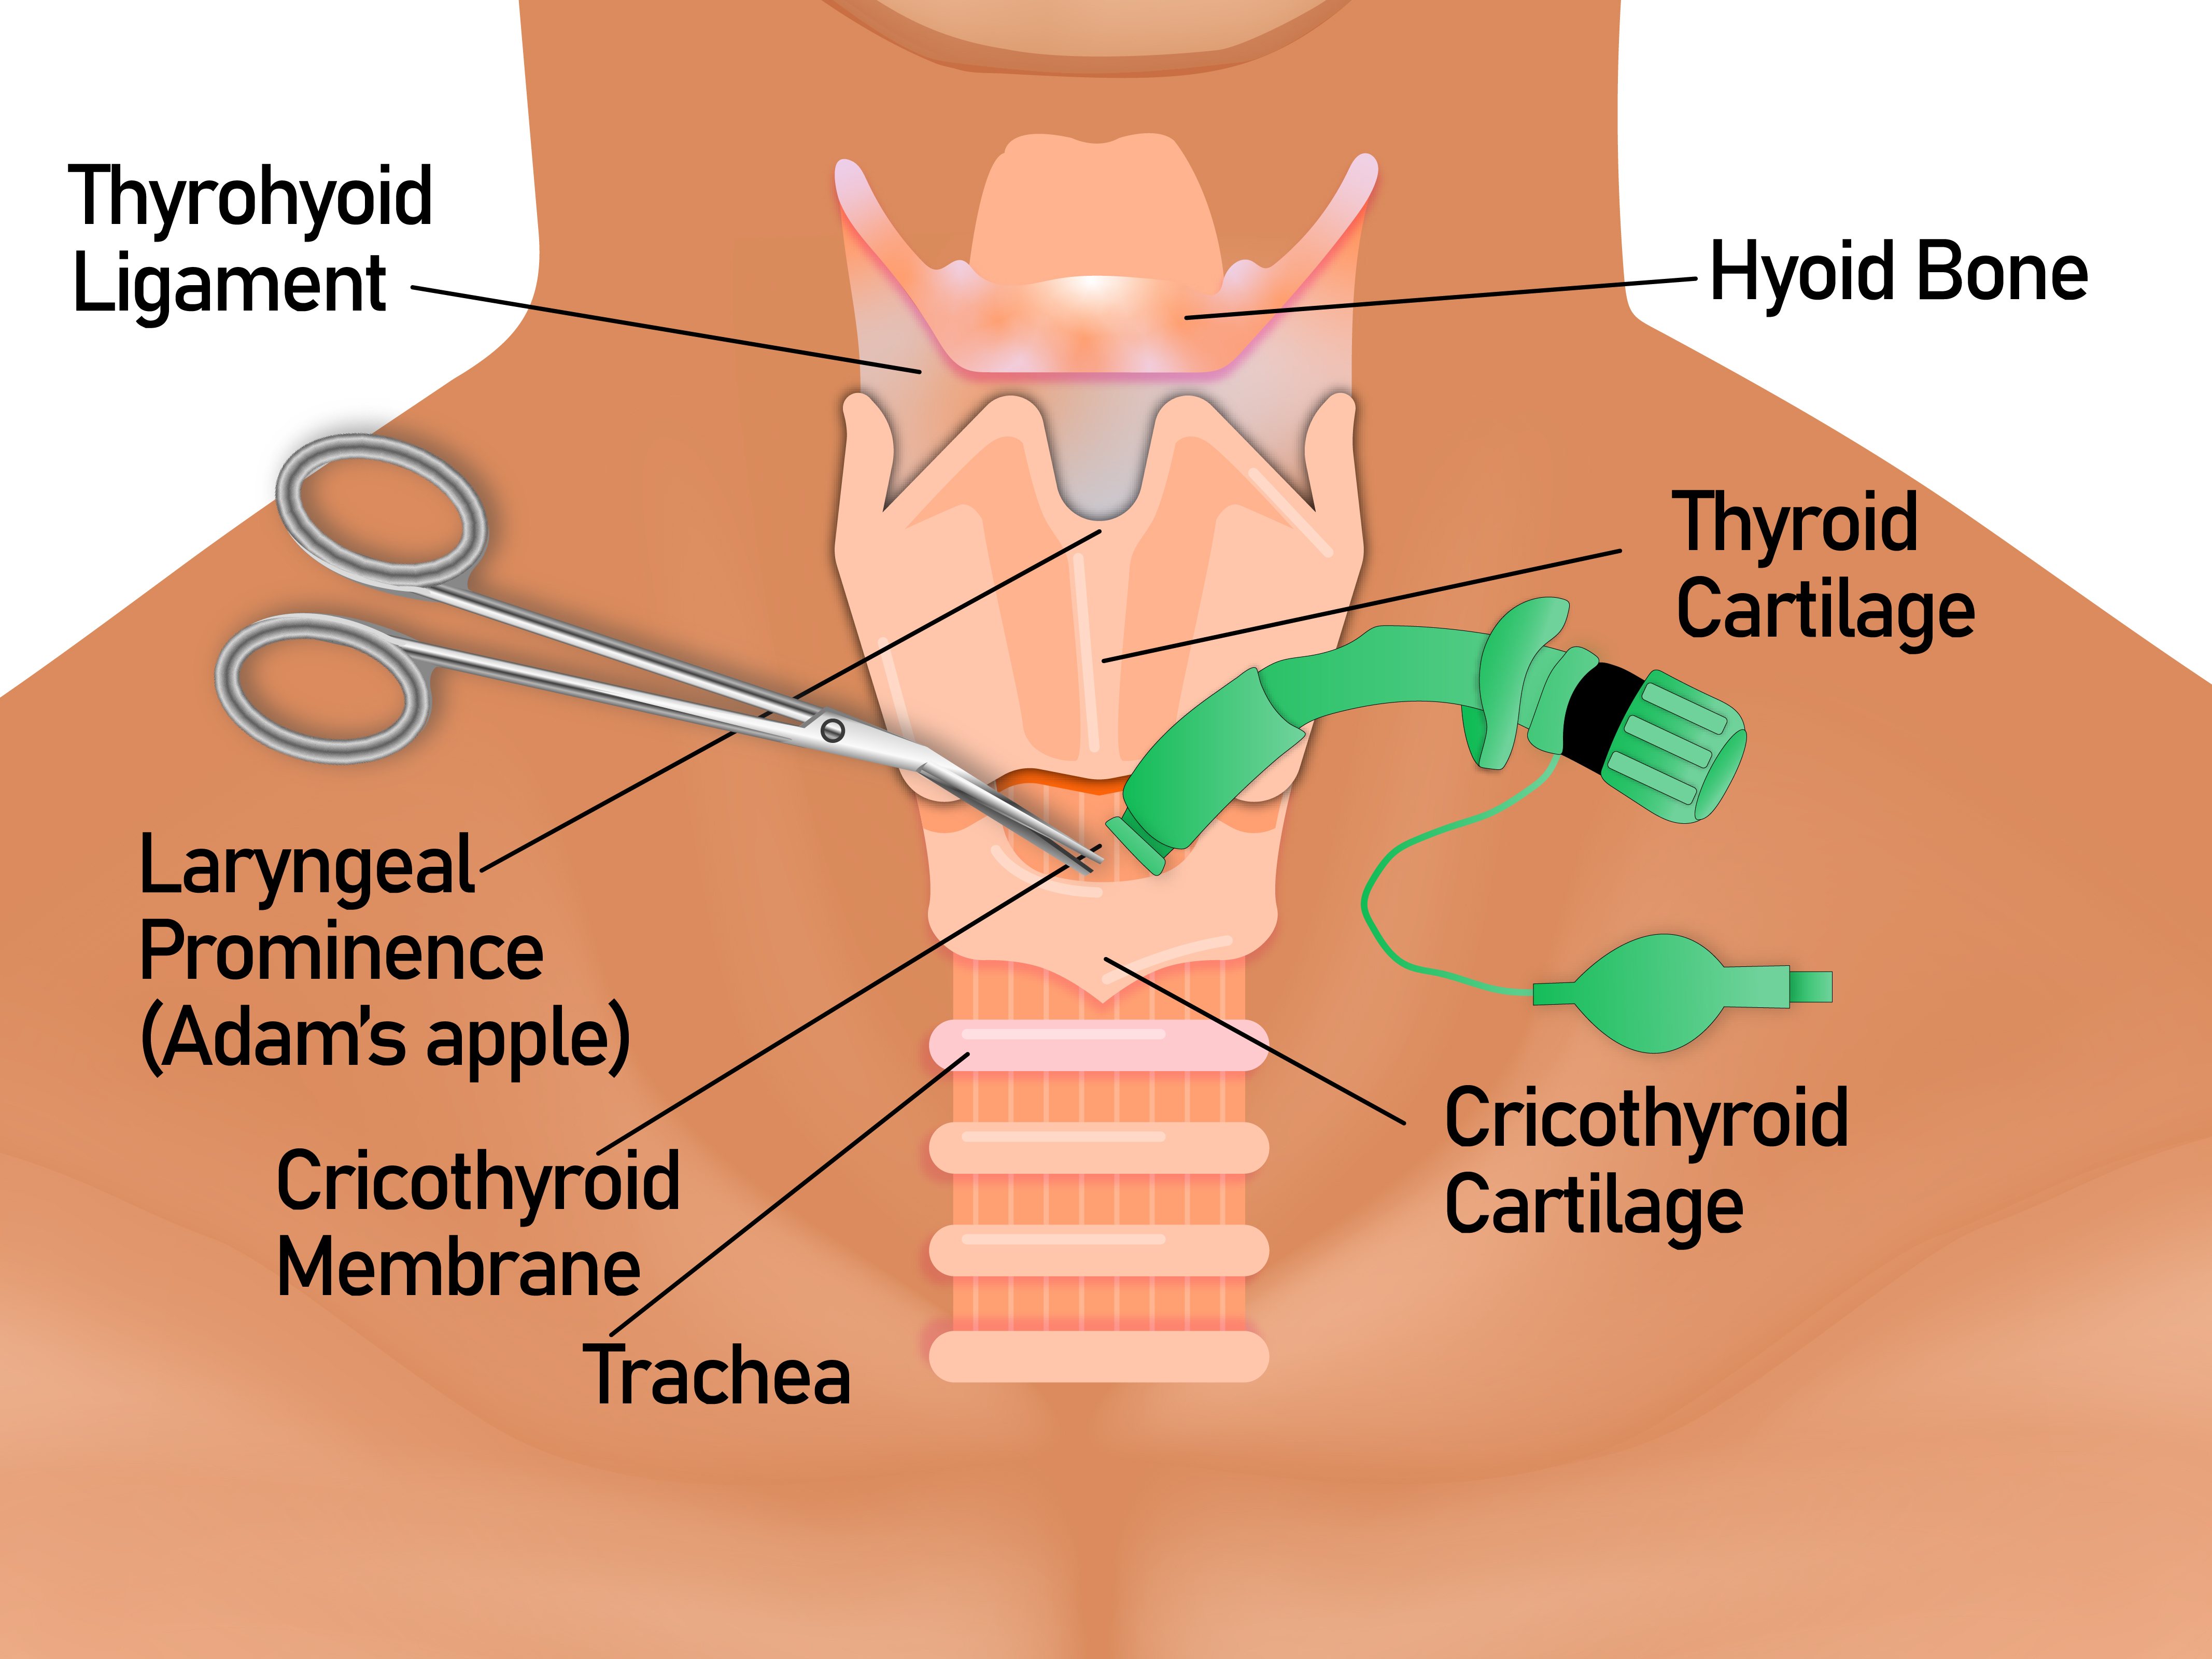 This image illustrates the anatomy and the framework of airway in the neck region. The cricothyroid membrane is located between the thyroid cartilage superiorly and the cricoid cartilage inferiorly. The cricothyroid membrane must be identified by palpation of the surrounding cartilaginous structures.